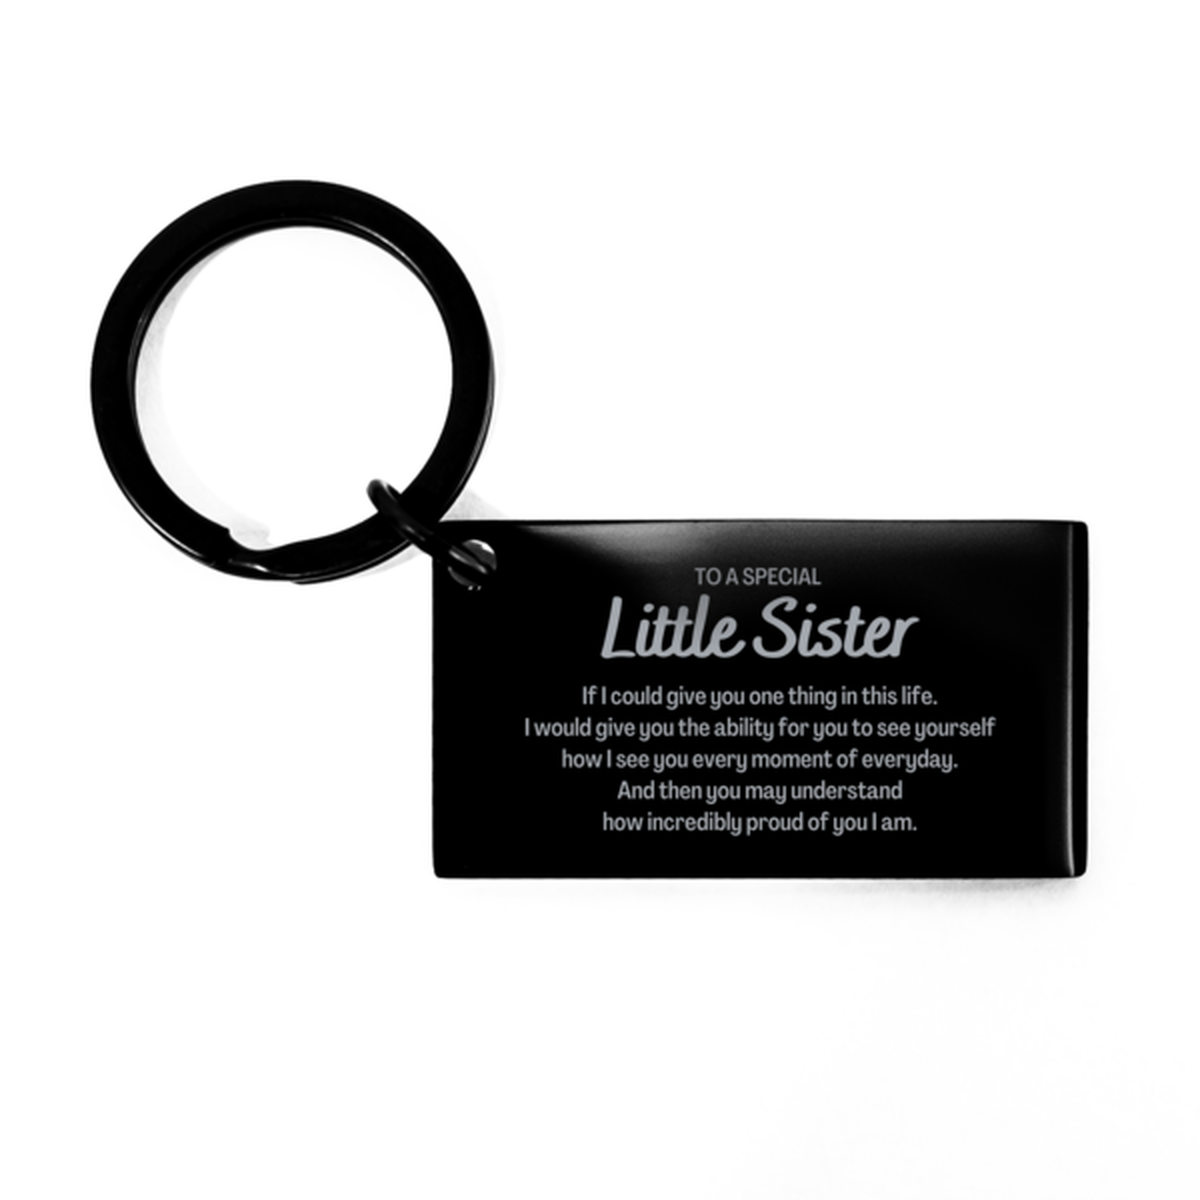 To My Little Sister Keychain, Gifts For Little Sister Engraved, Inspirational Gifts for Christmas Birthday, Epic Gifts for Little Sister To A Special Little Sister how incredibly proud of you I am